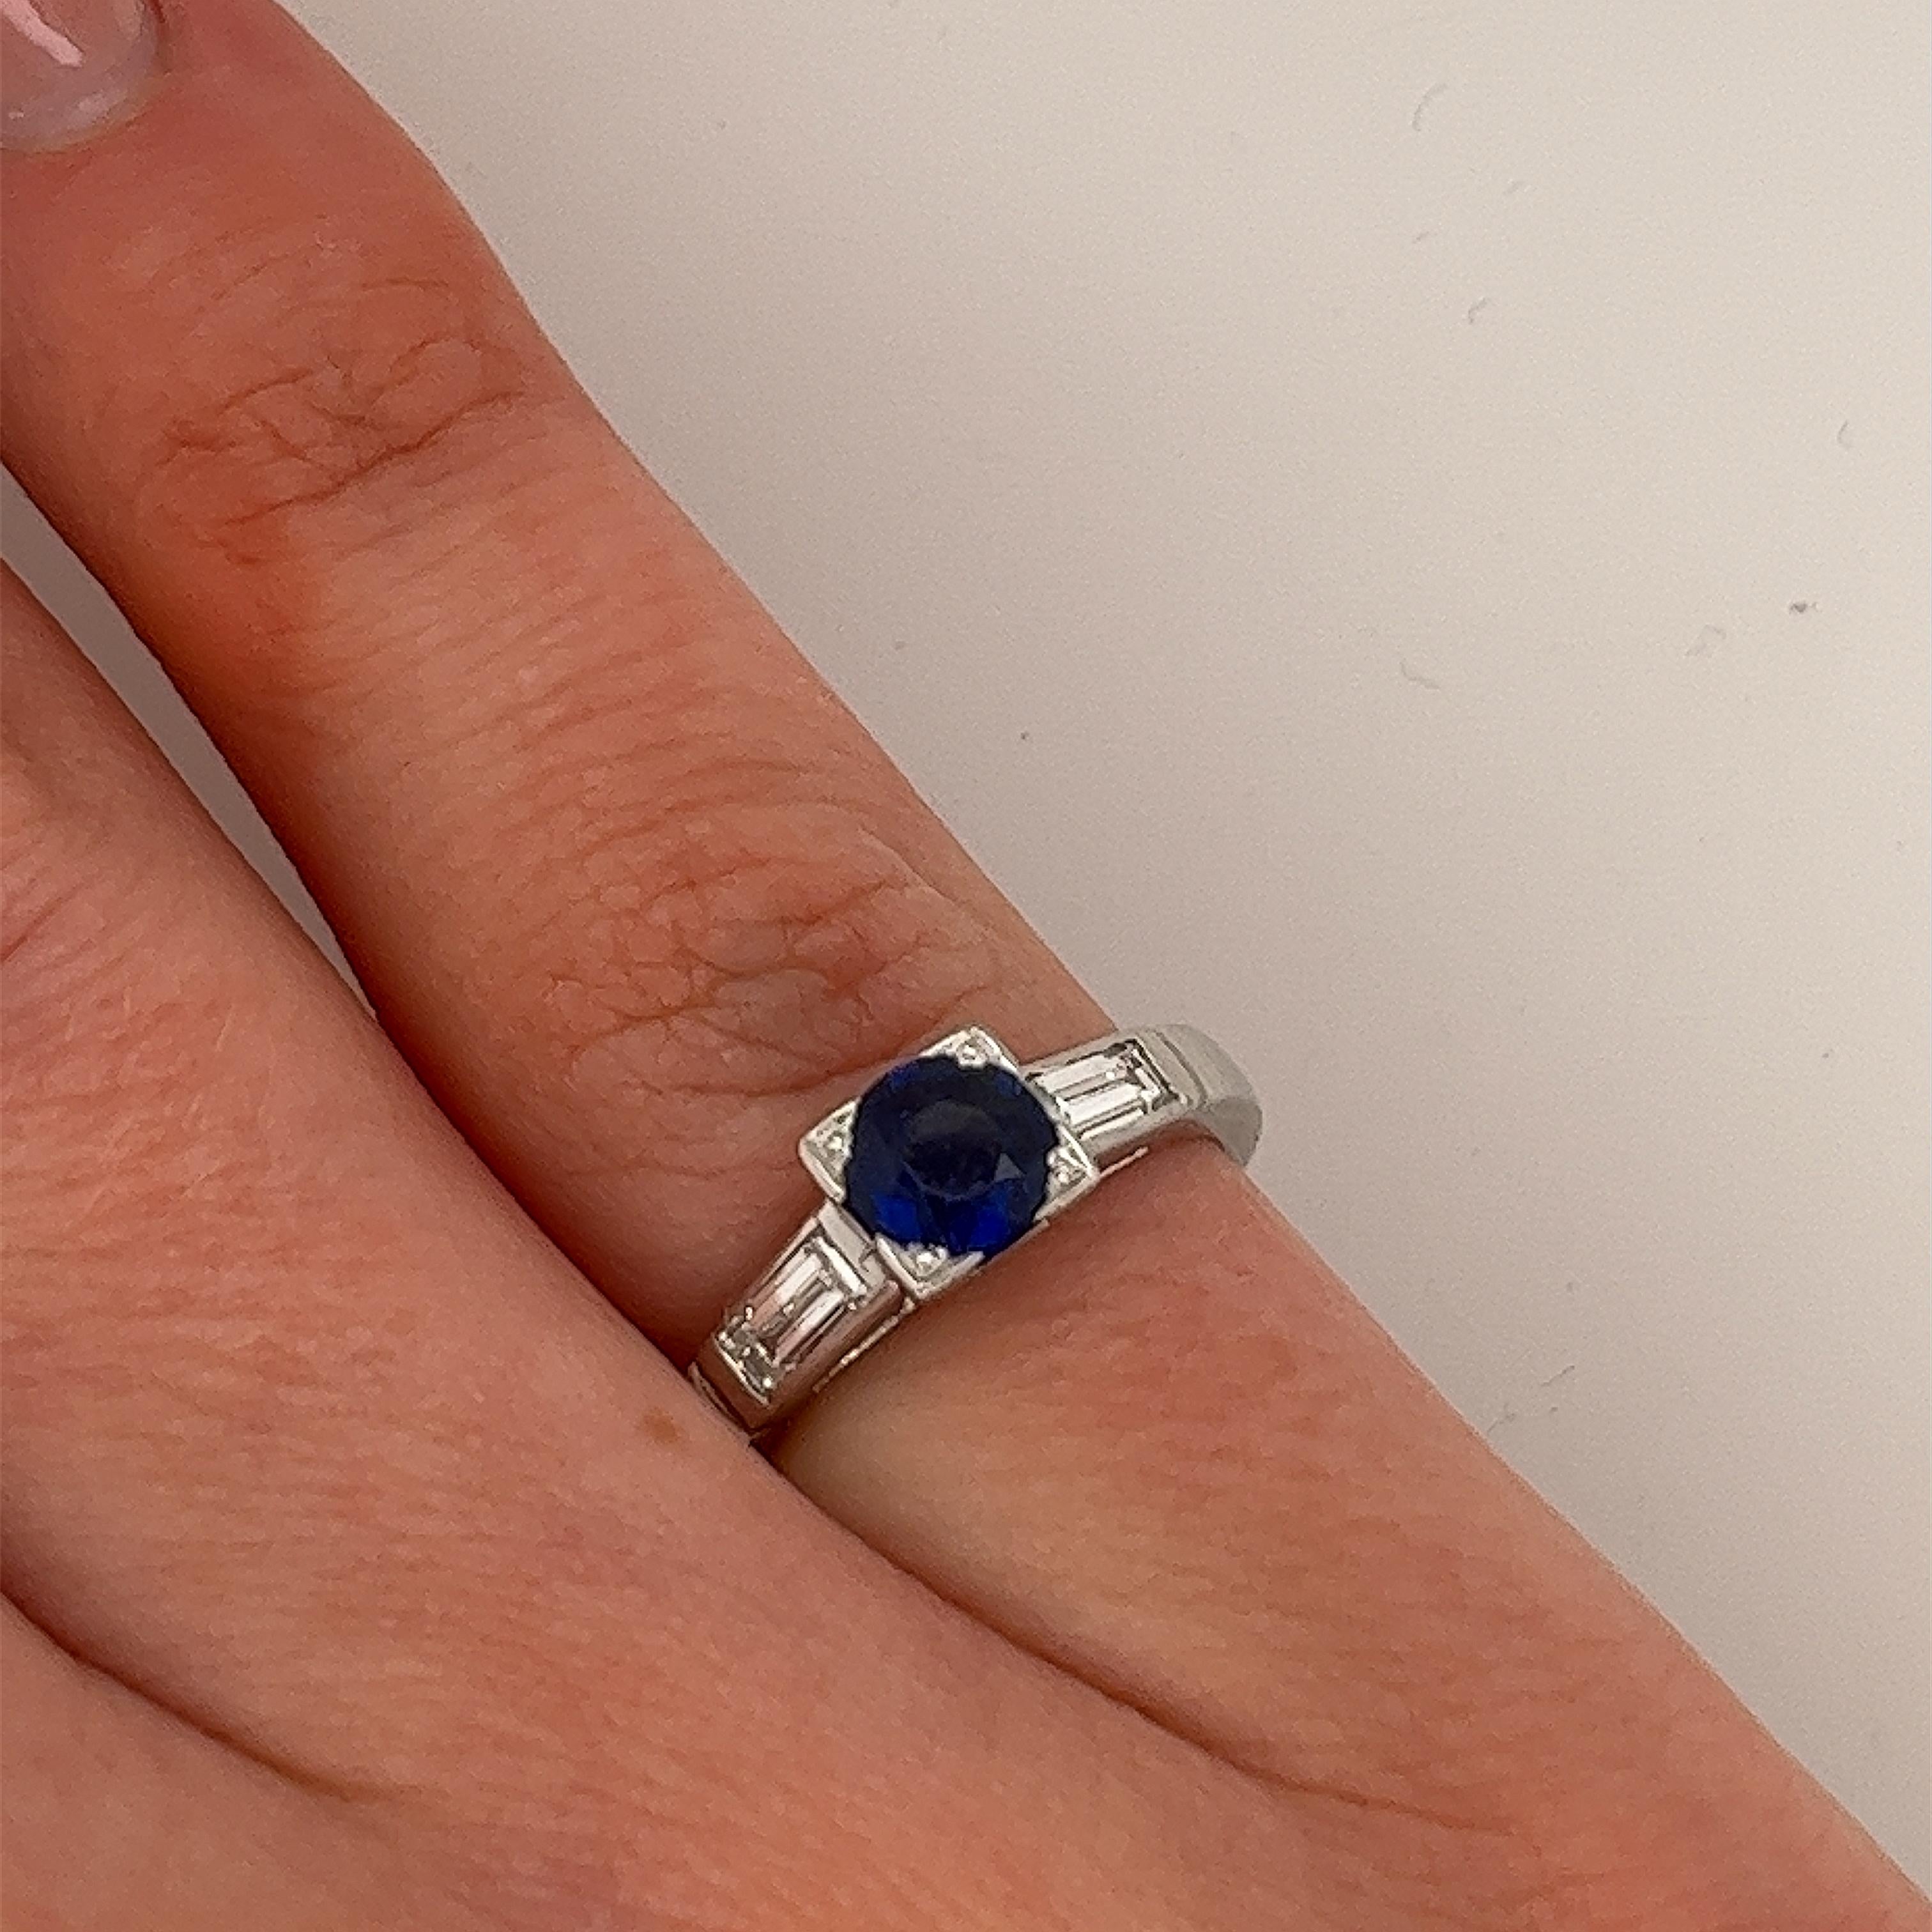 Platinum 0.60ct Sapphire & Diamond Ring Set With 2 Baguettes Diamonds on Sides For Sale 1